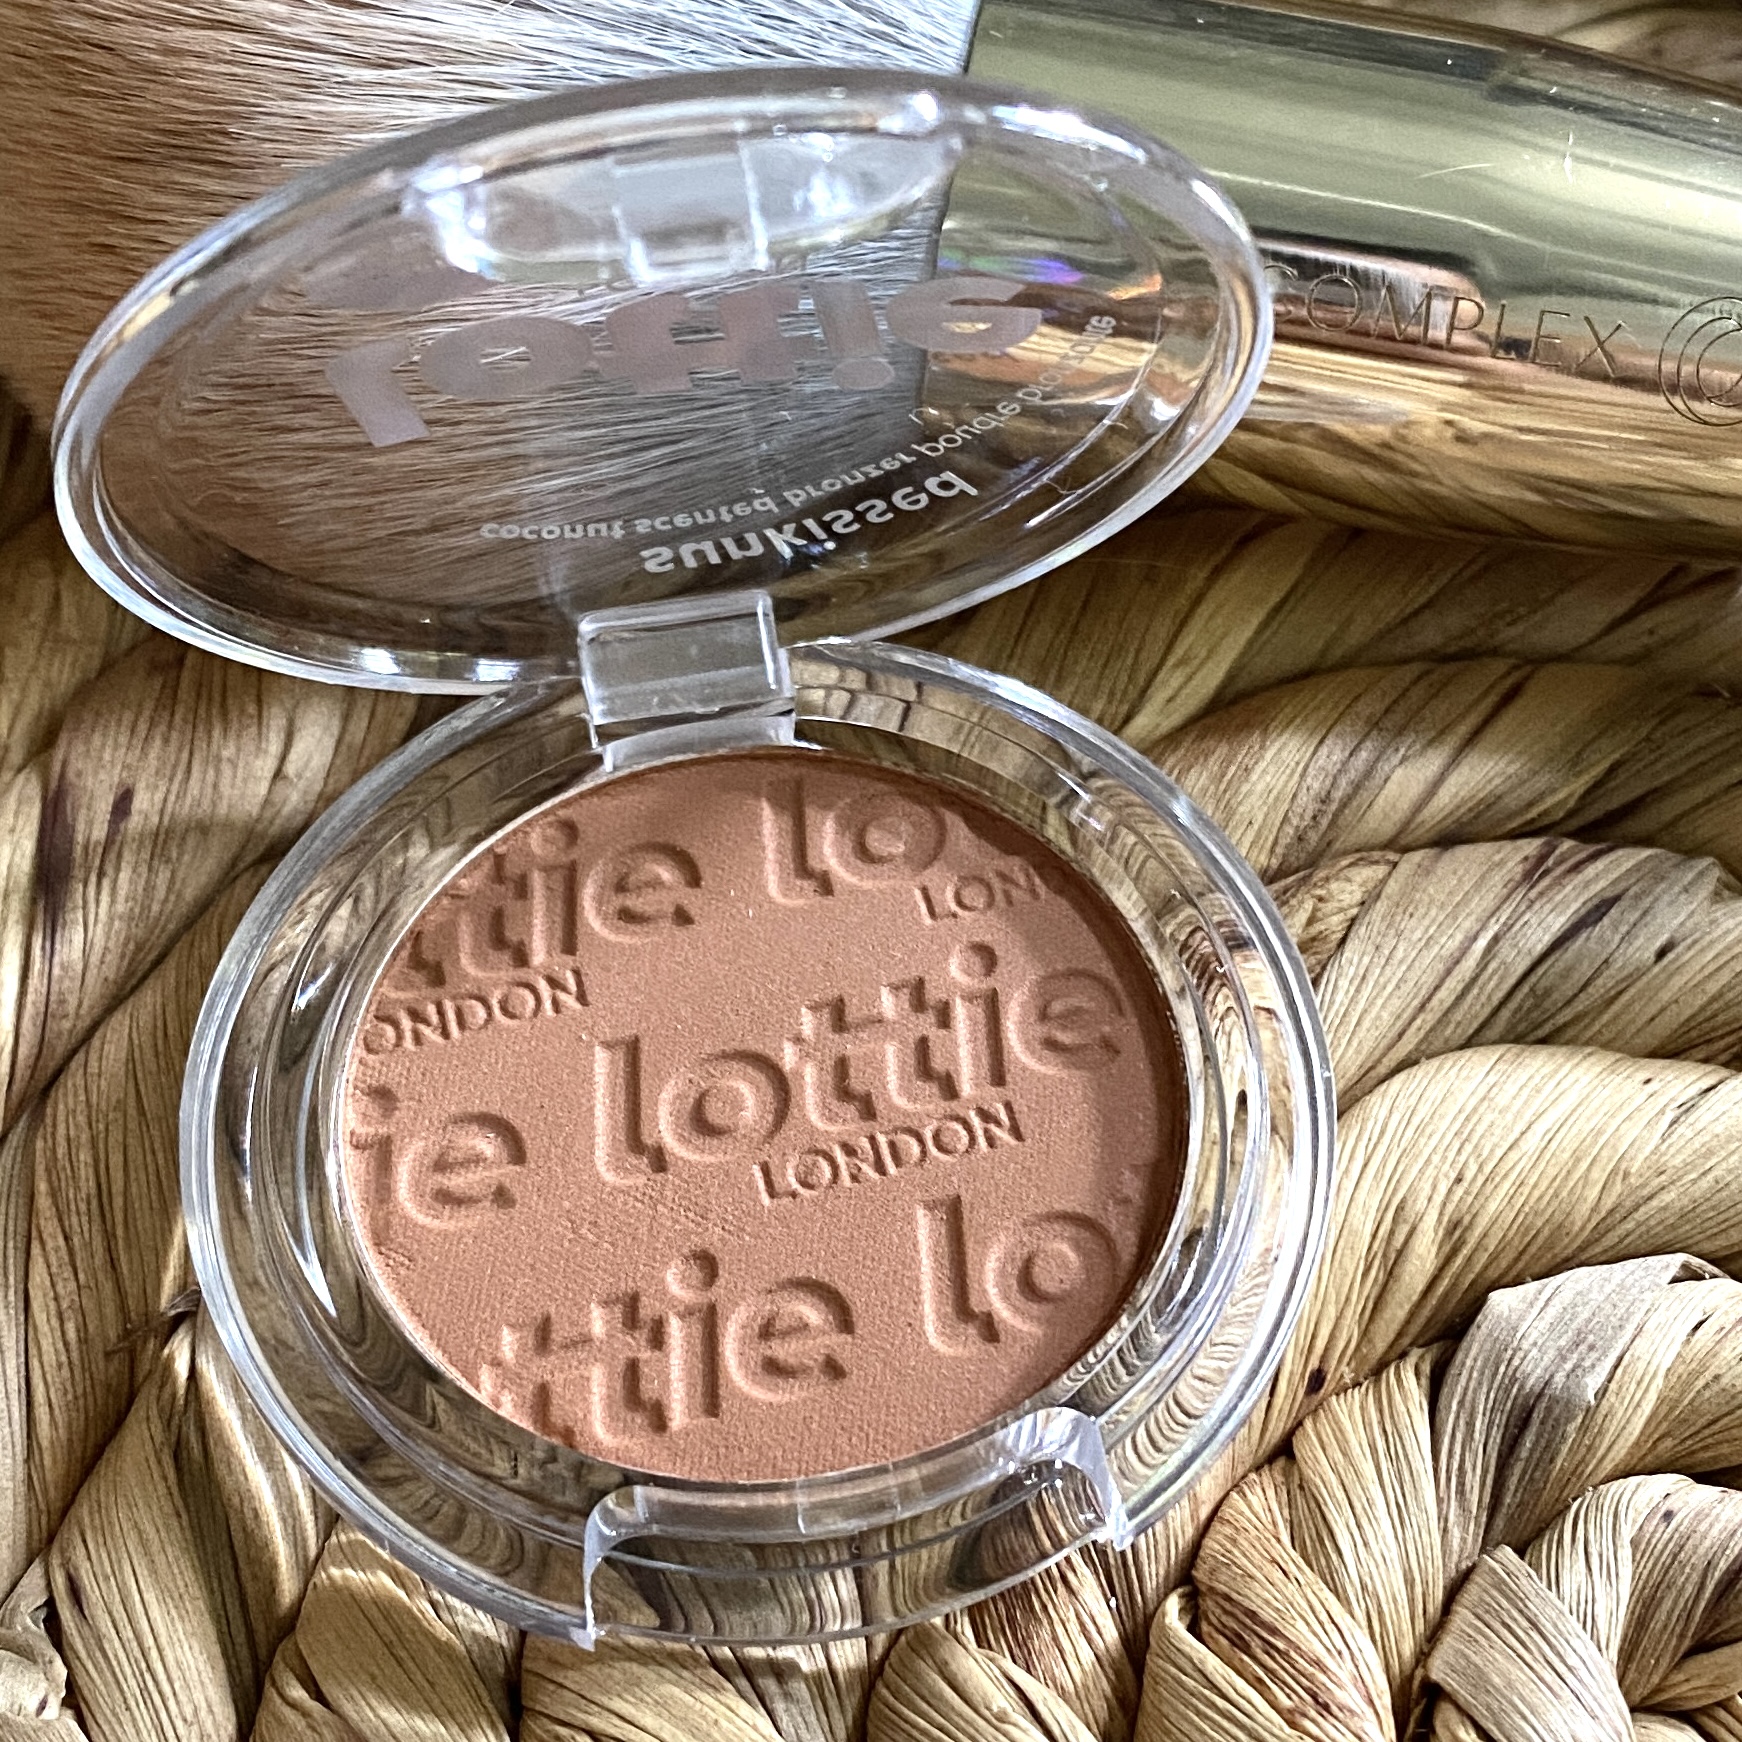 Open Lottie London Sunkissed Coconut Scented Bronzer in Suncatcher for Ipsy Glam Bag August 2021